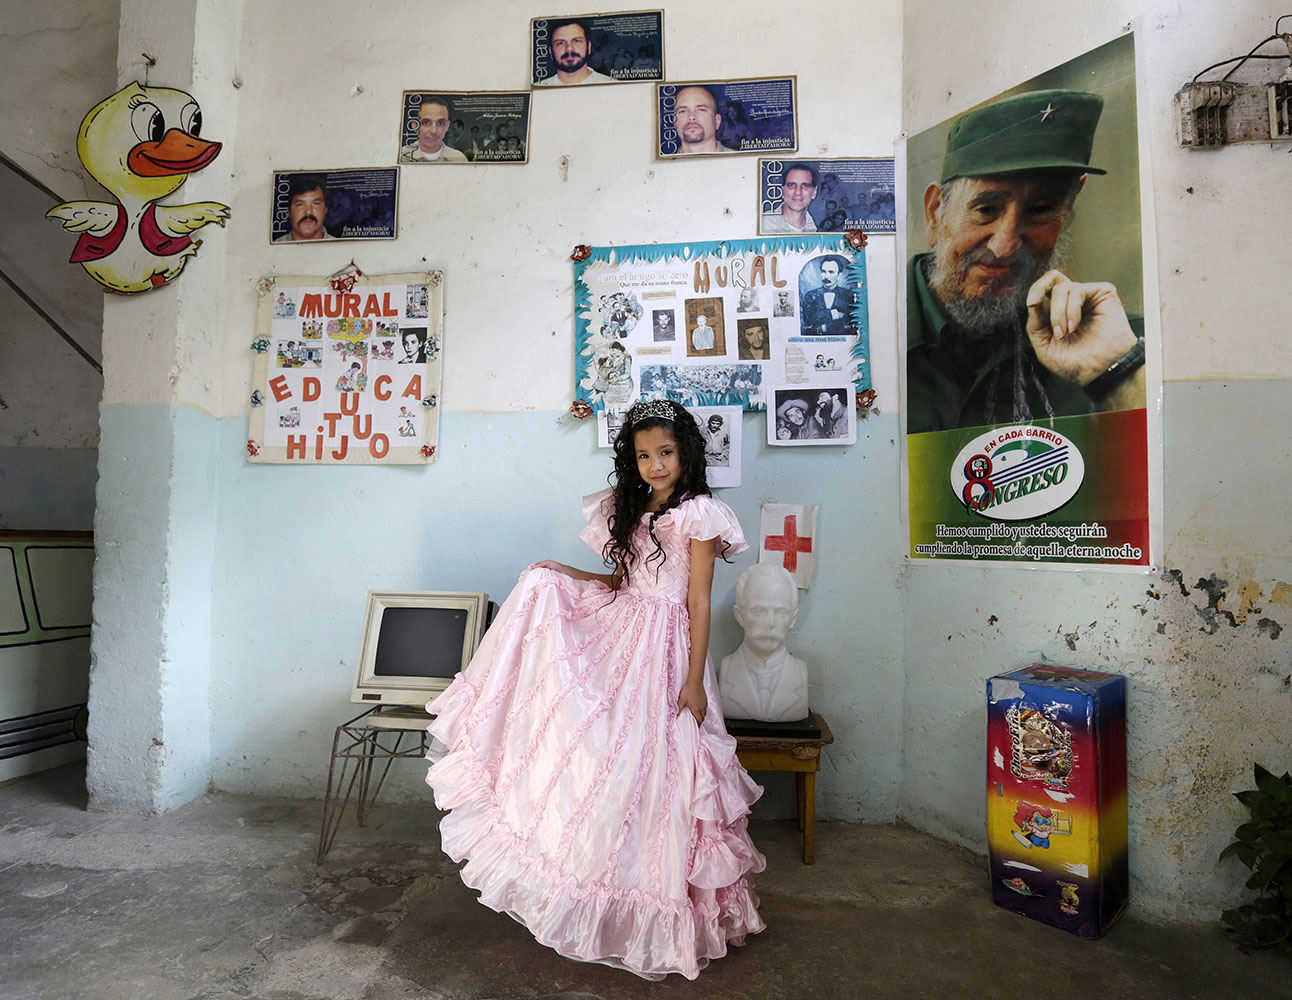 Apr. 4, 2014. Fifth grade student at the Enrique Villuendas Primary School, Erika Kina, 10, poses in her princess costume as her school celebrates the 52nd anniversary of the Young Communist League (UJC) and the 53rd anniversary of the Jose Marti Pioneers Organization (OPJM) in Havana, Cuba.